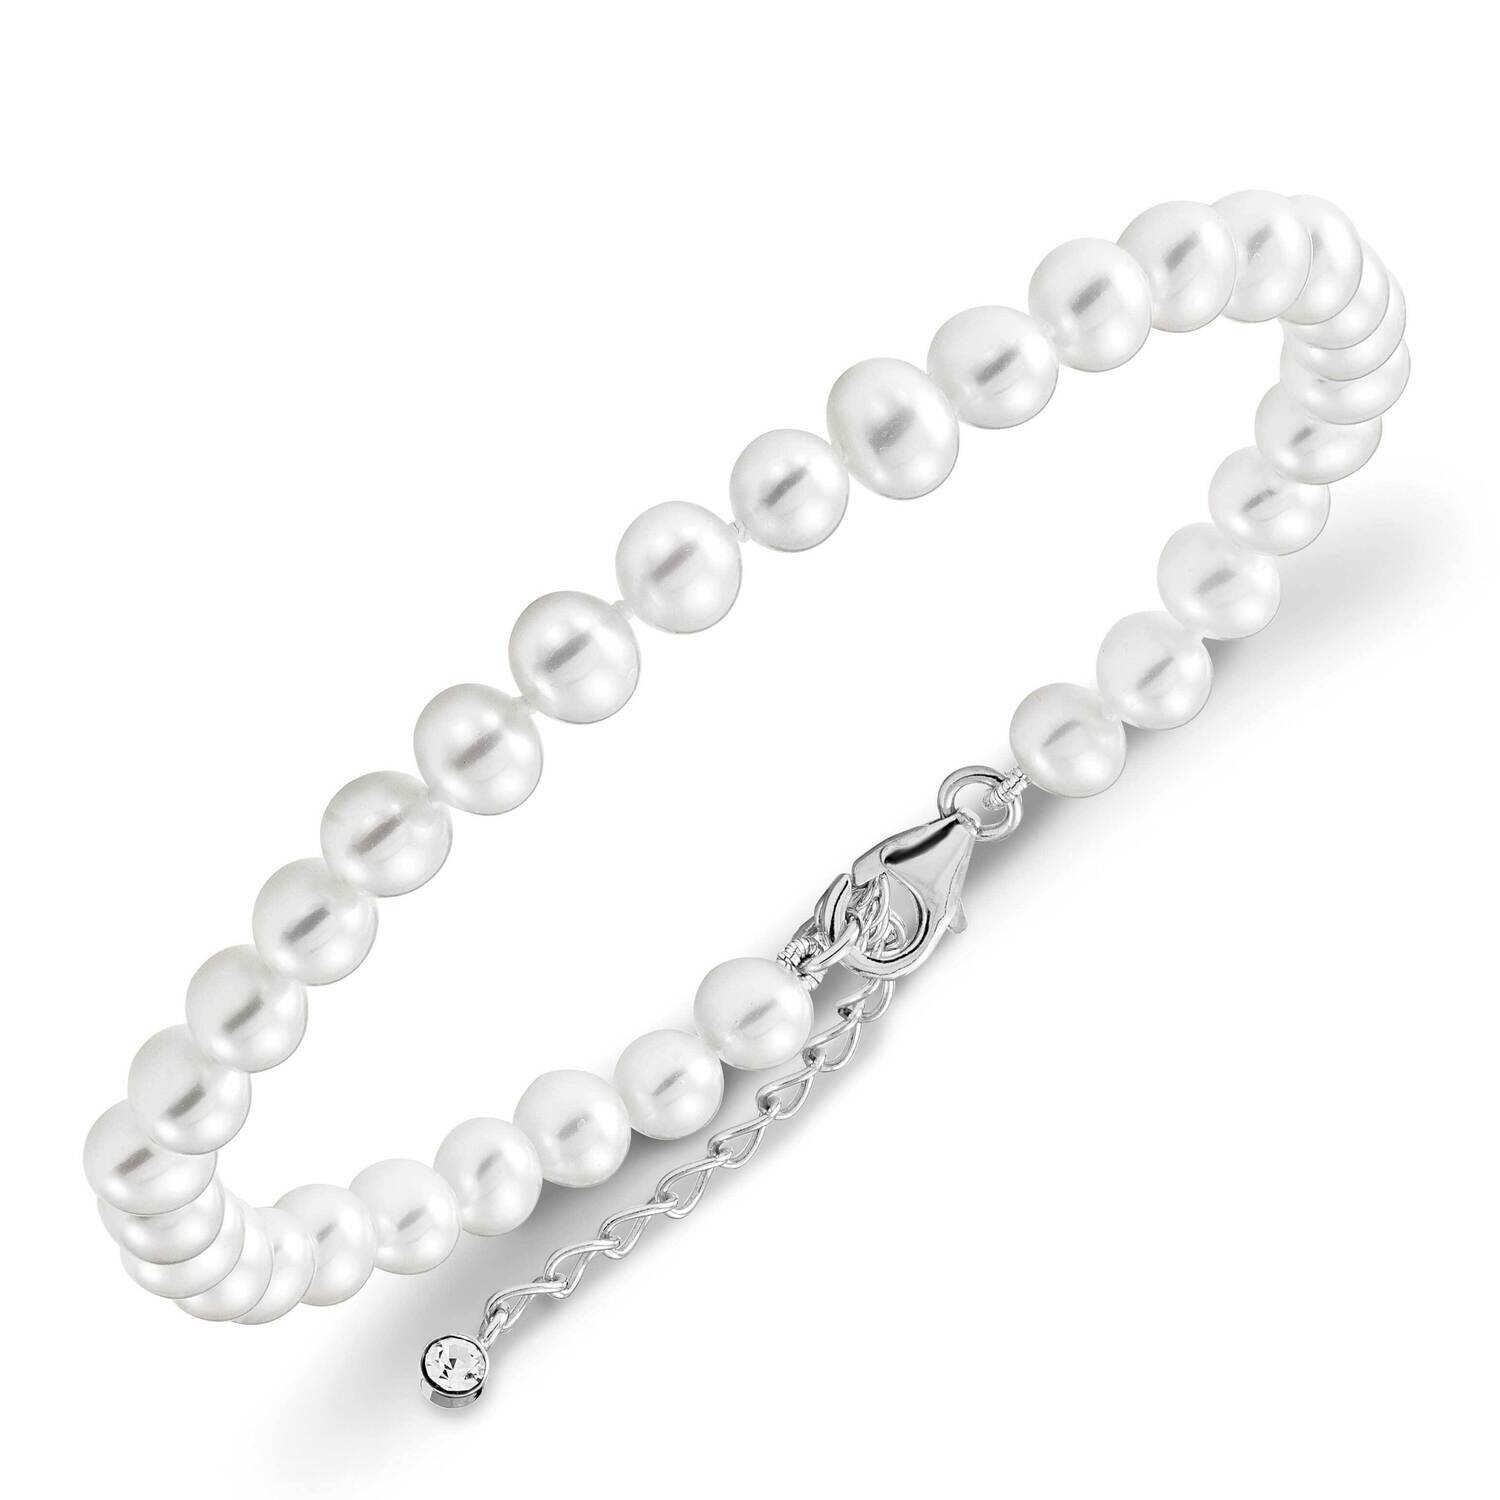 6-7mm Fwc Pearl & Cz with 2 Inch Extension Anklet Sterling Silver Rhodium-plated QH5447-8.5